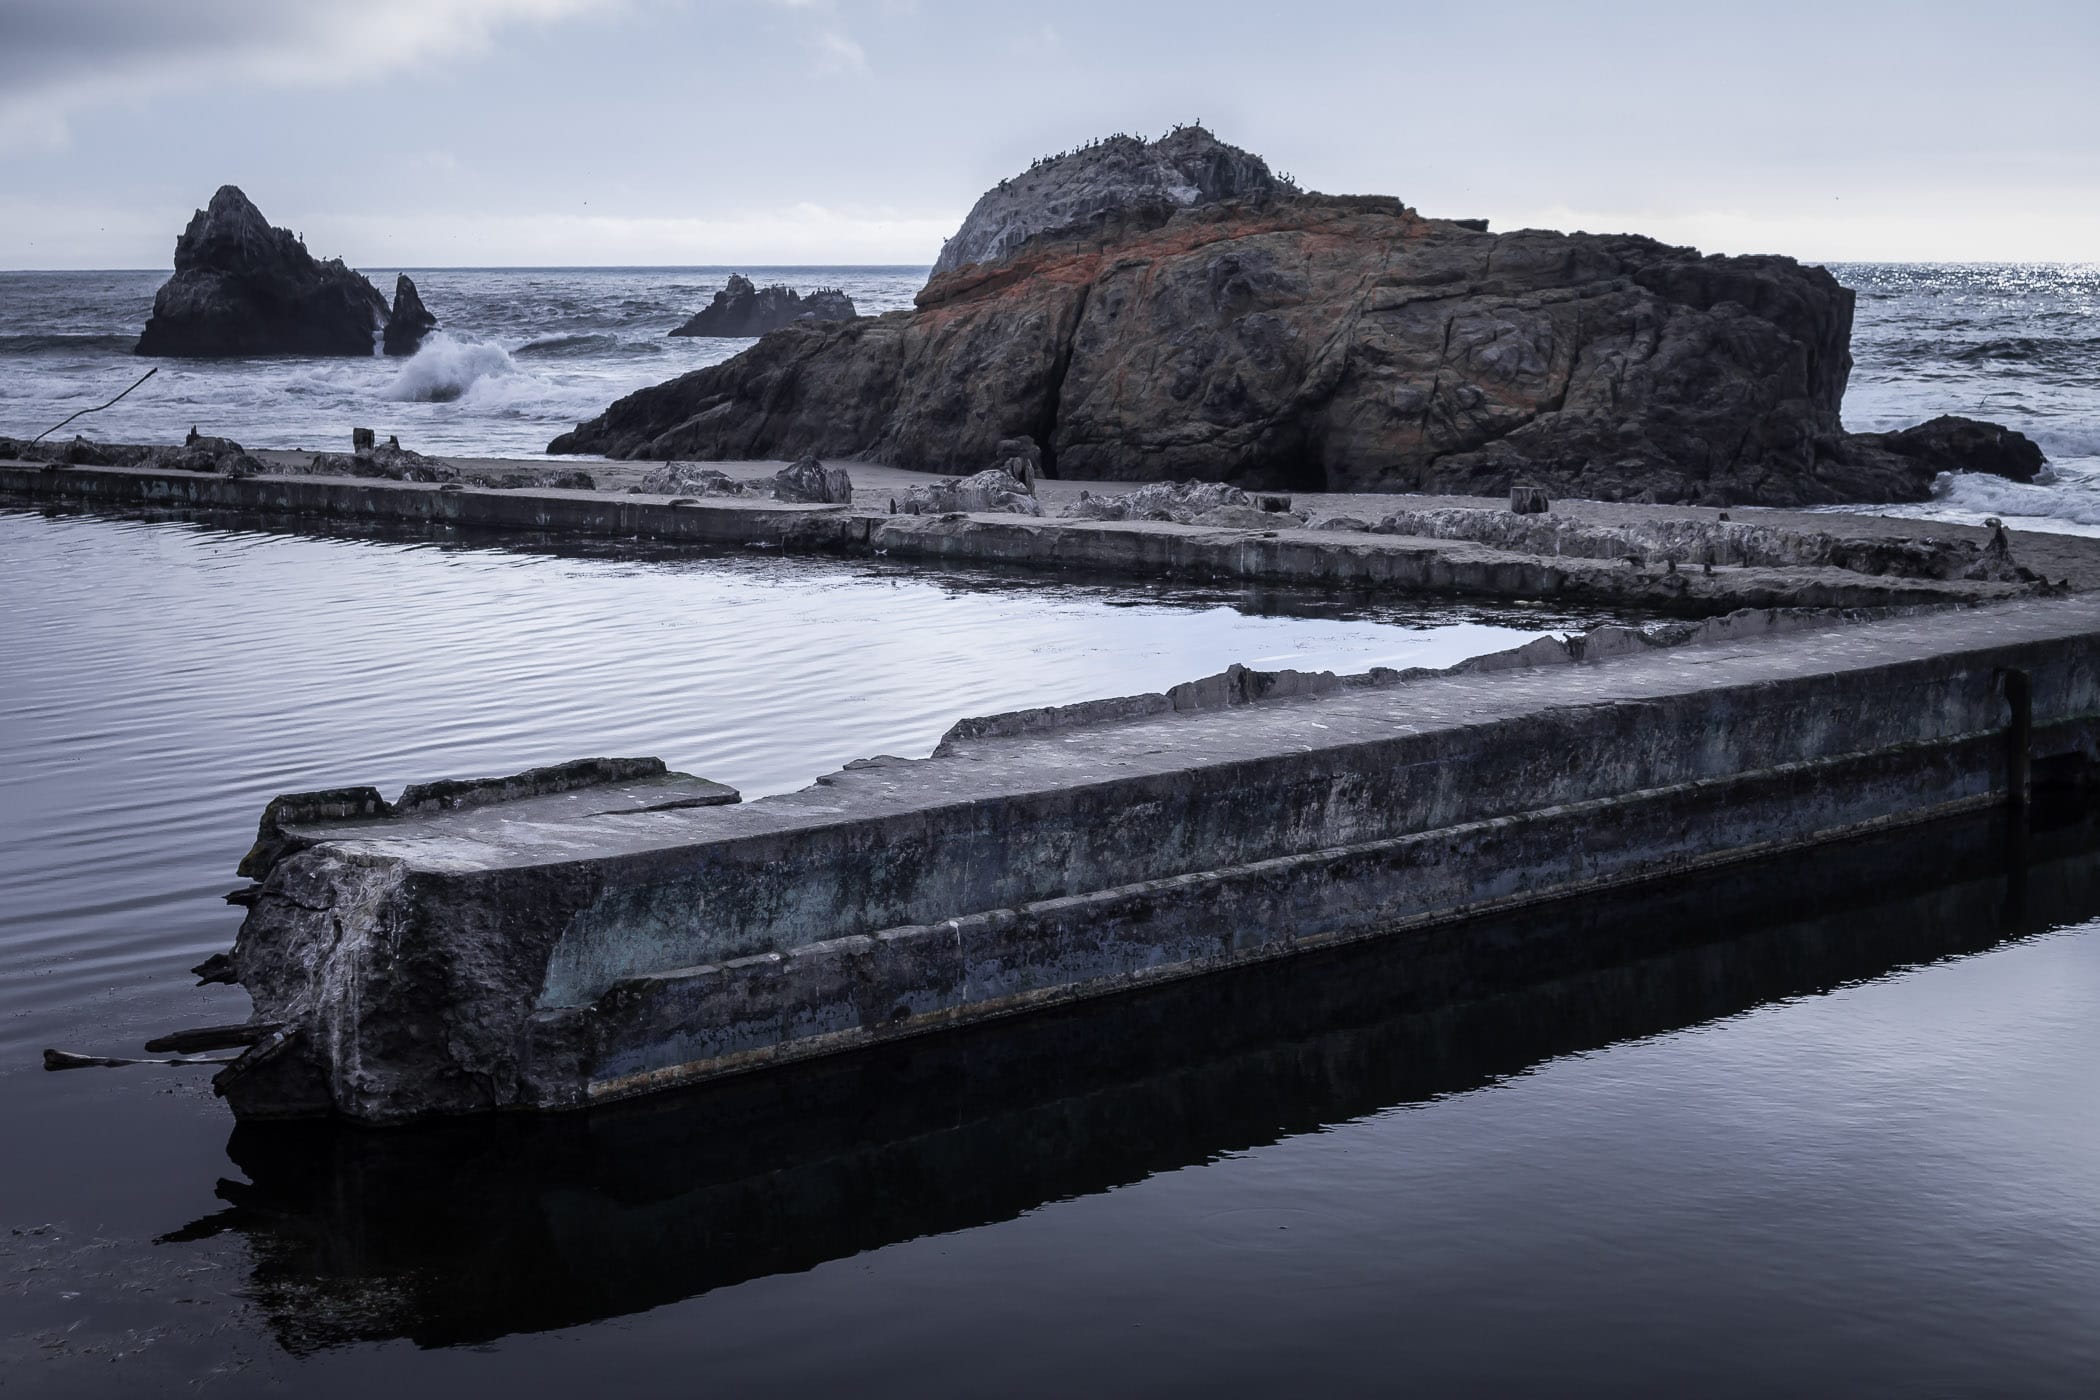 The ruins of San Francisco’s Sutro Baths, once the world’s largest indoor swimming pool, lie along the beach at Lands End.